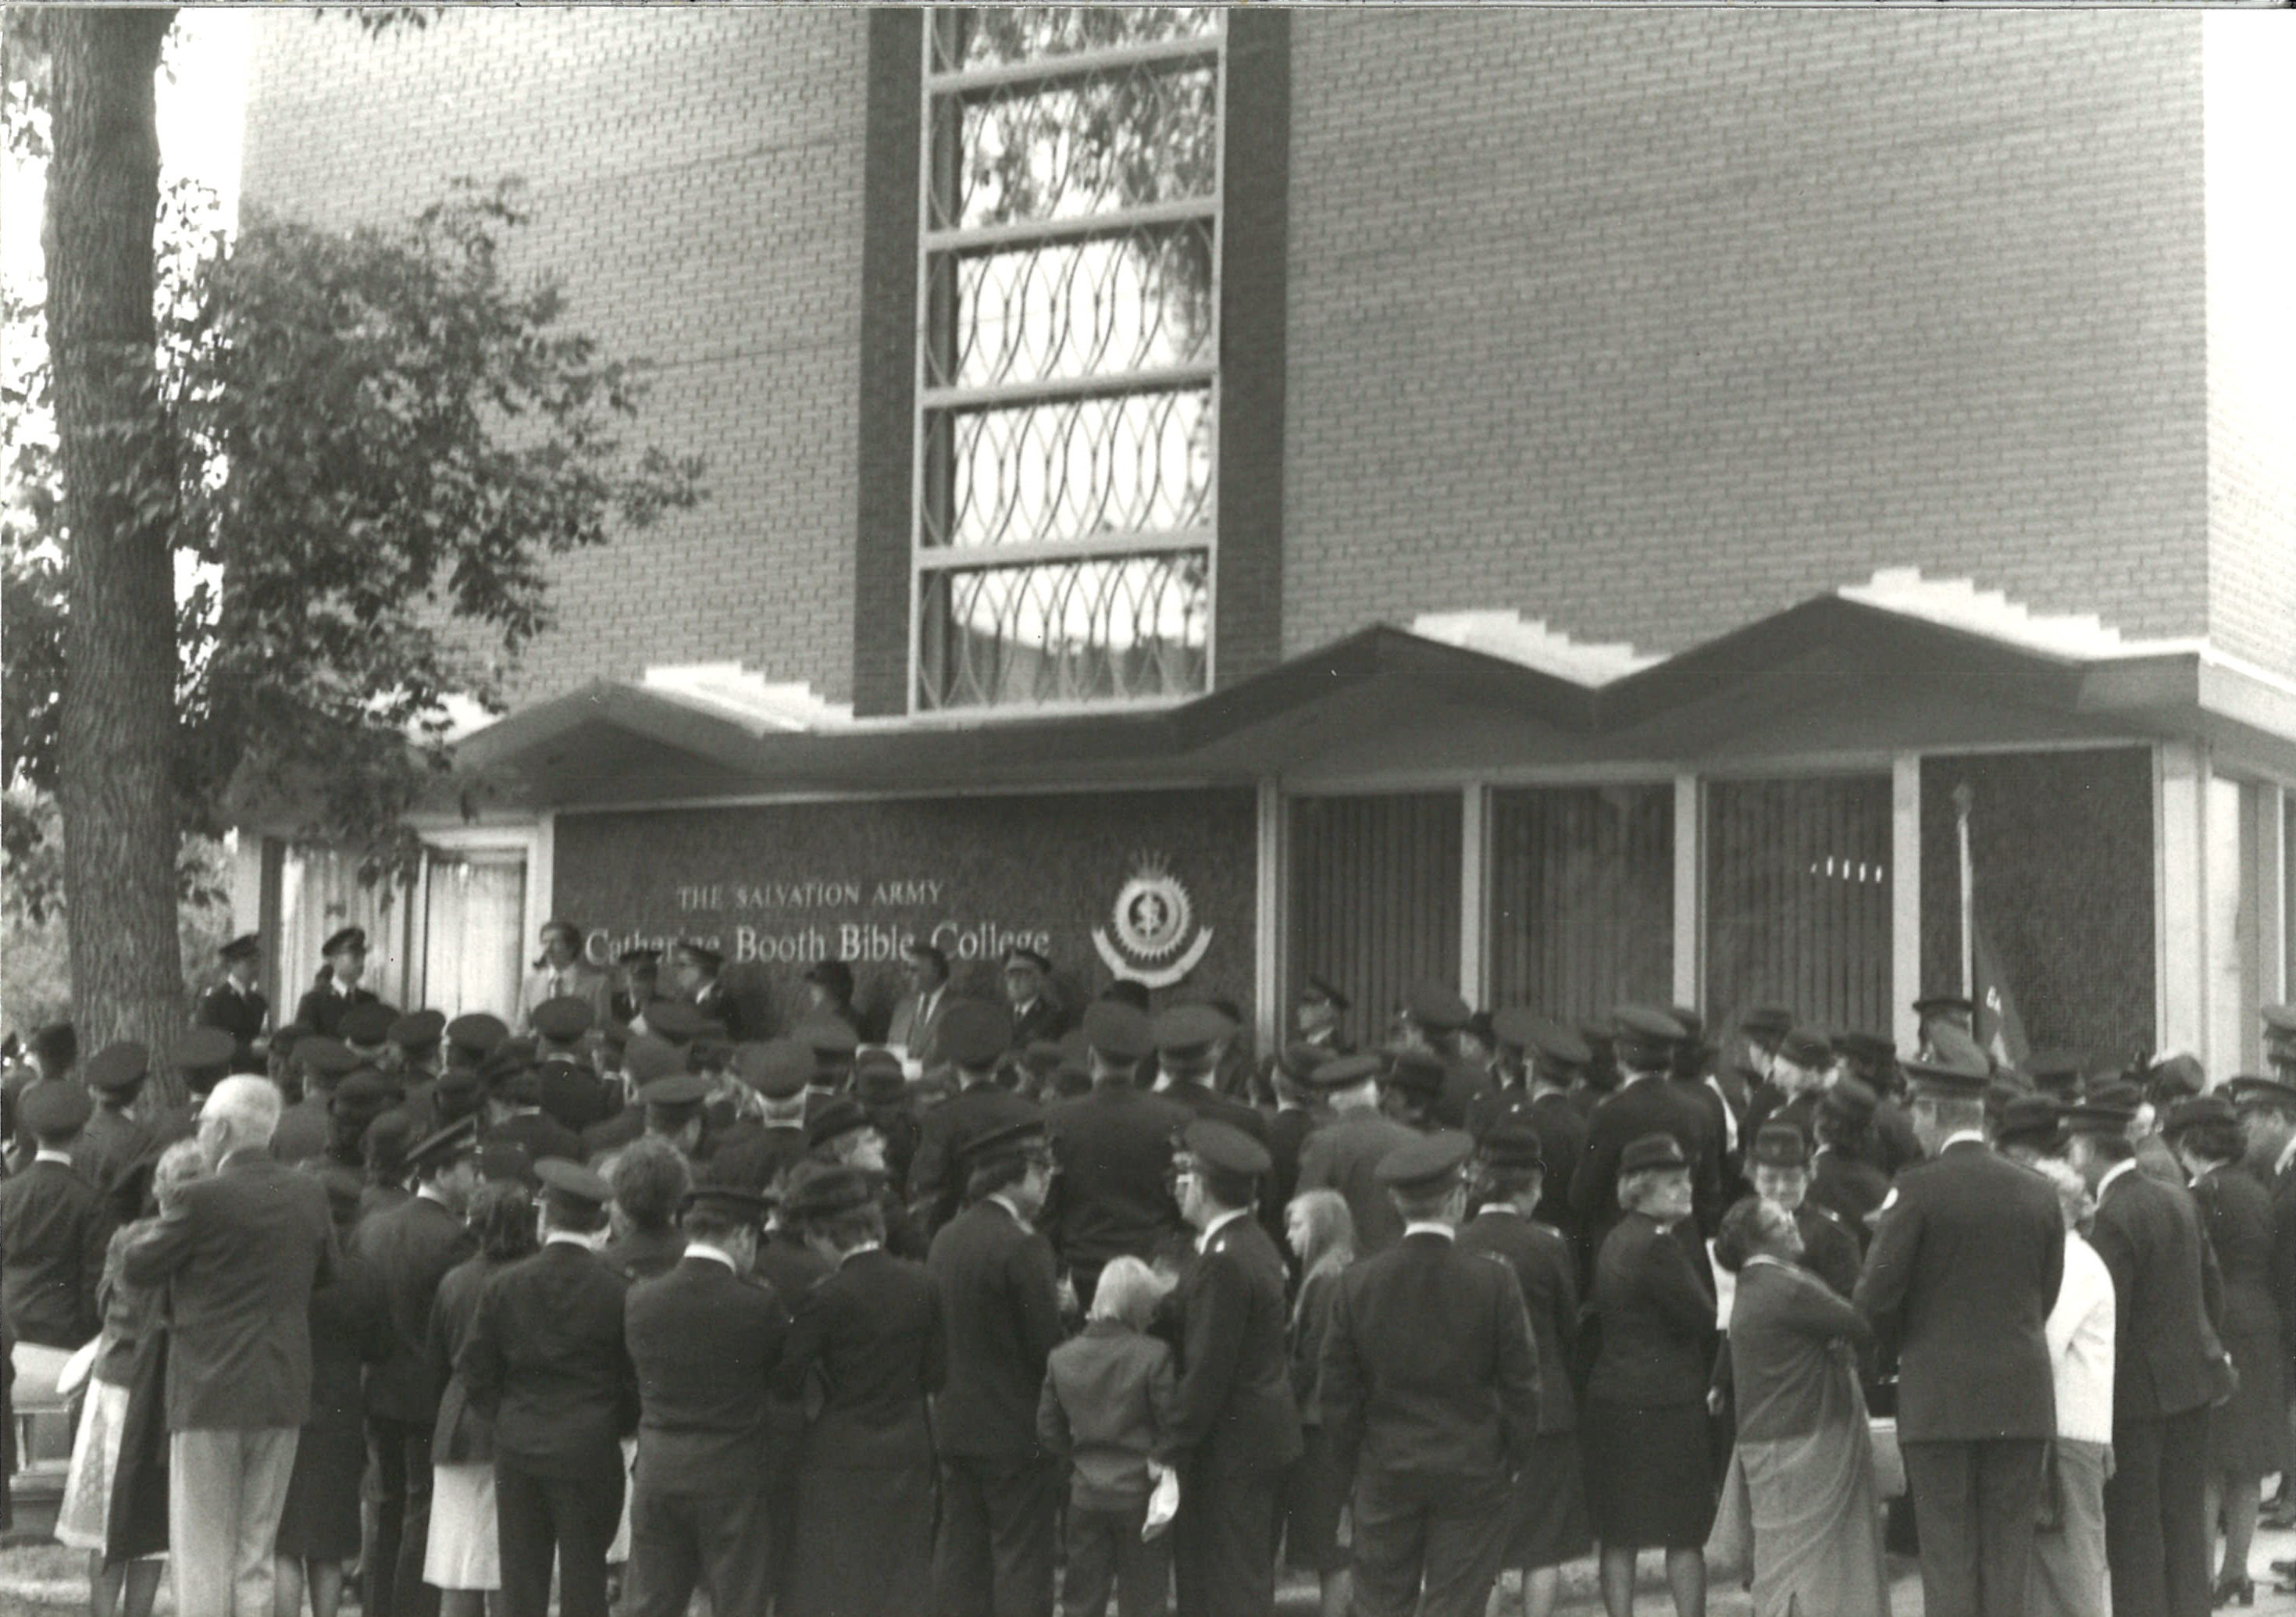 In black and white, people gather outside the front entrance for a ceremony at the first property.